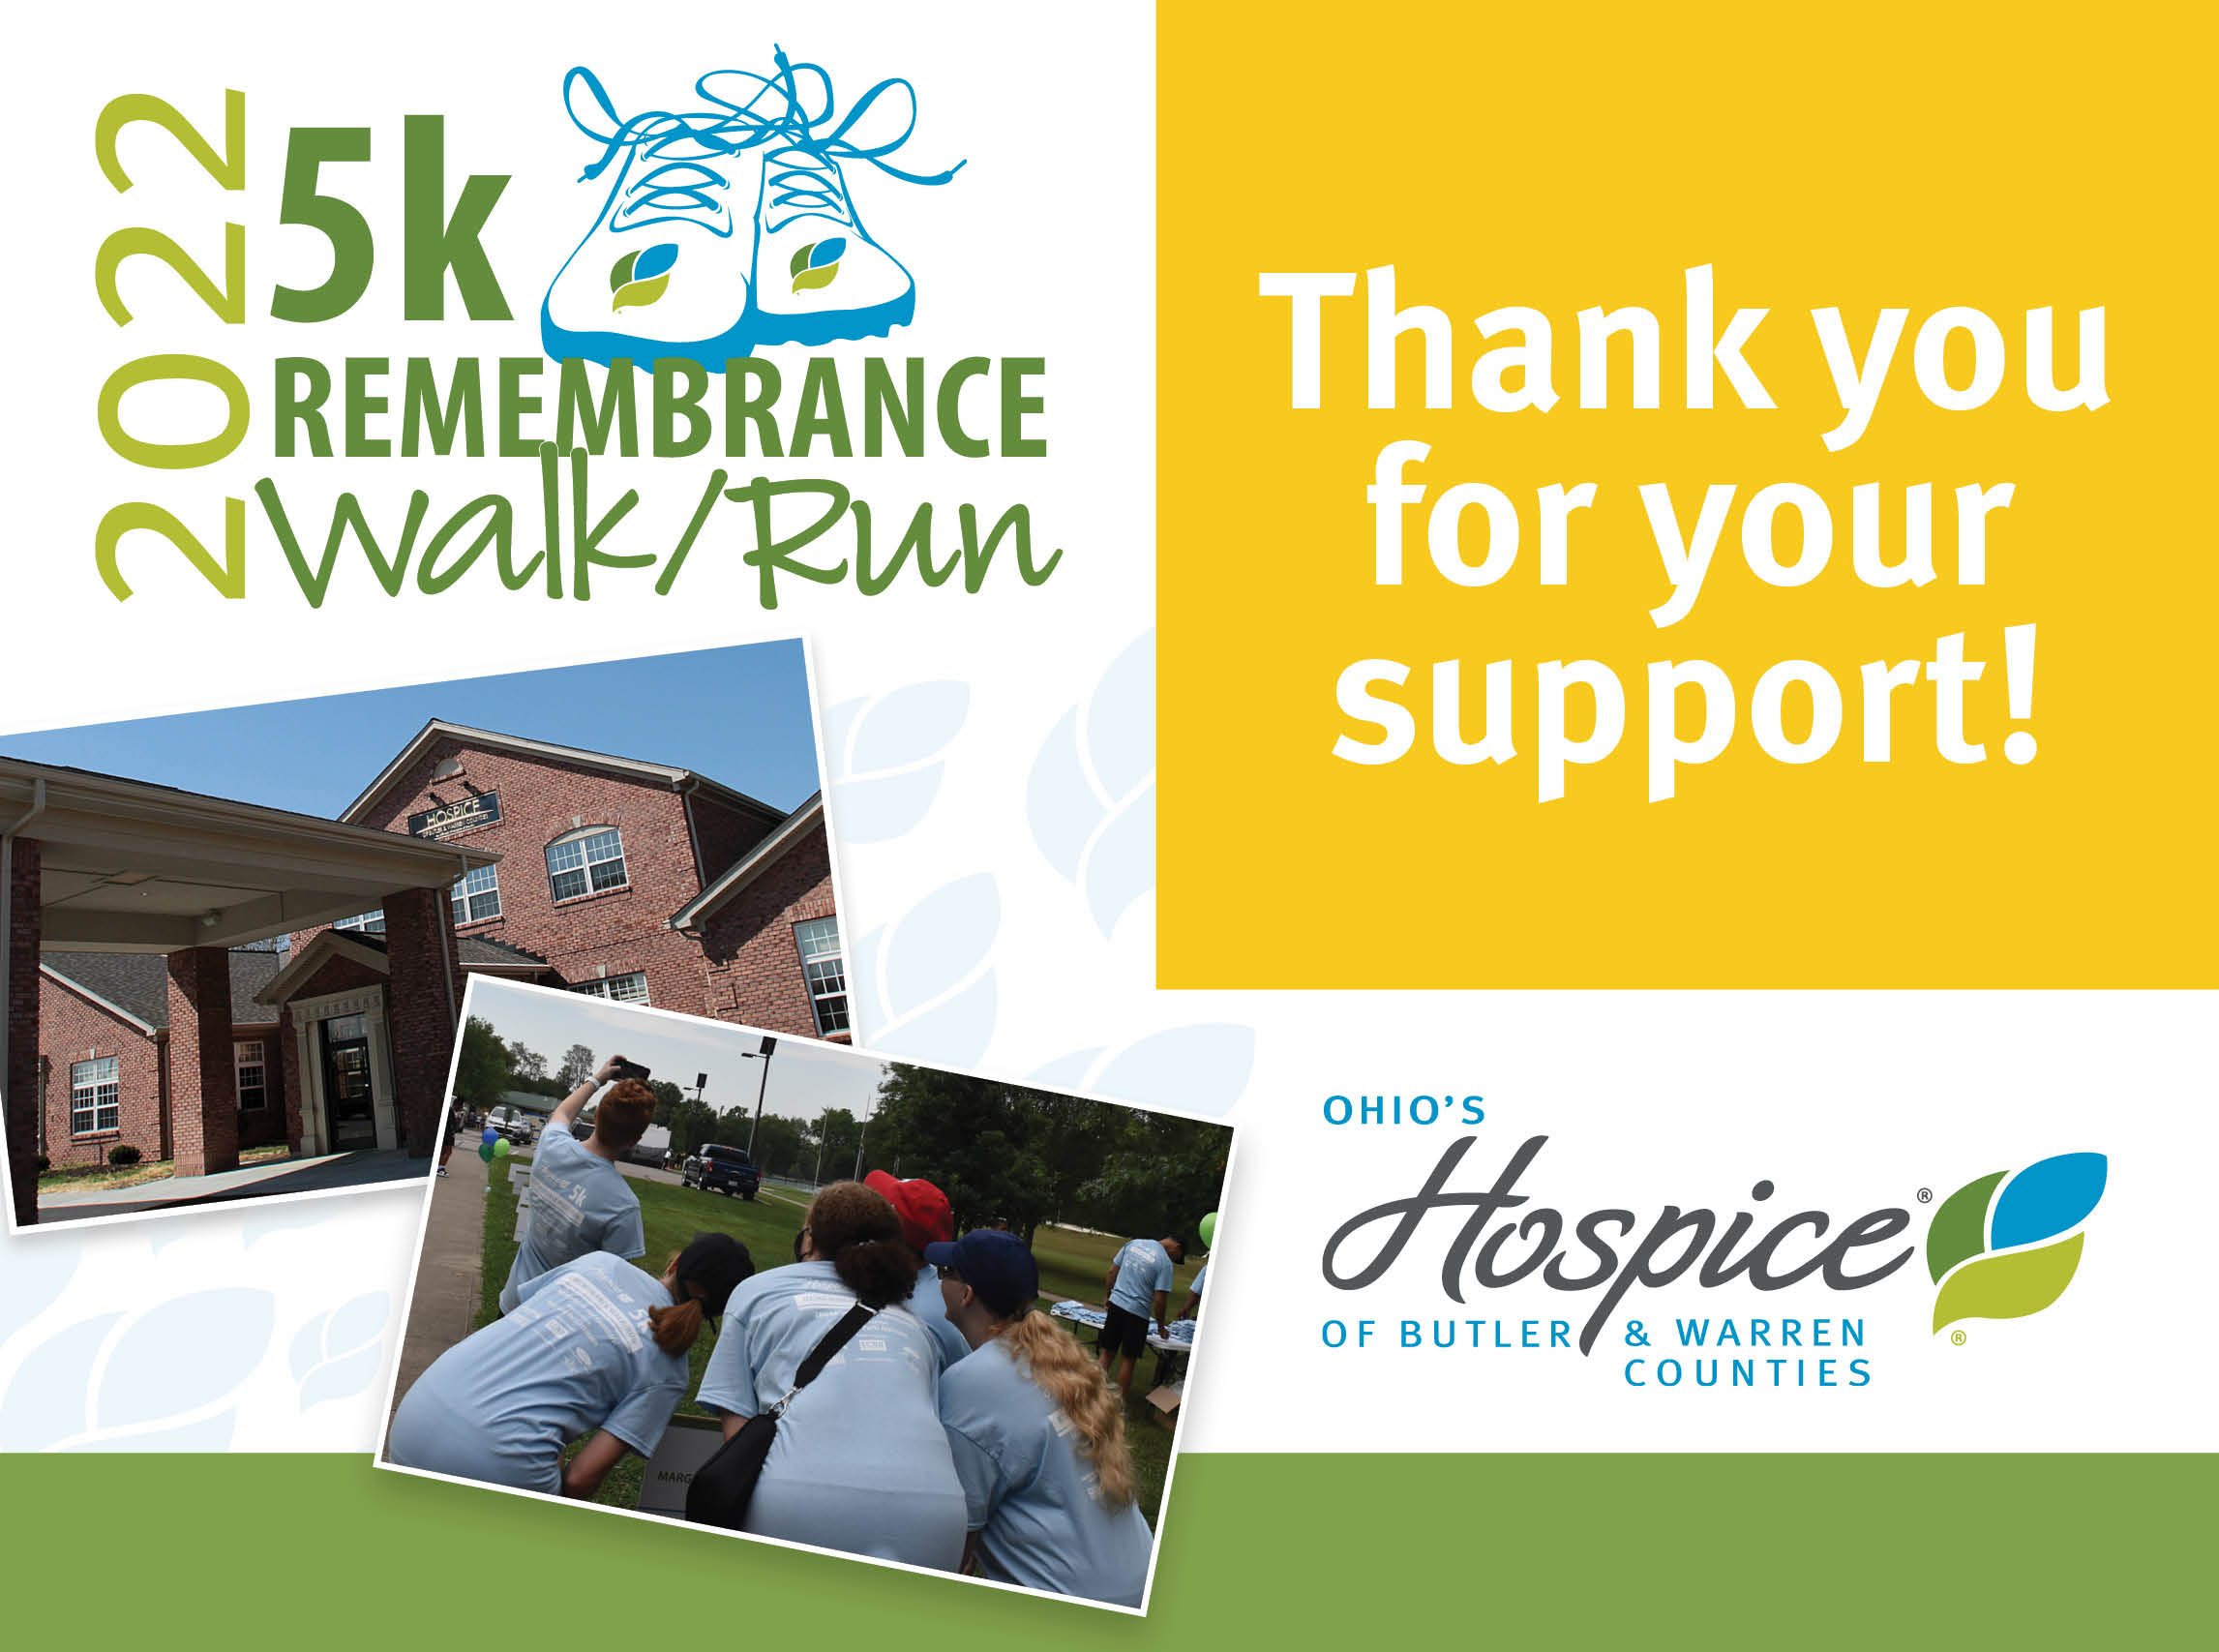 Thank you for your support of the 2022 5k Remebrance Wak/Run! - Ohio's Hospice of Butler & Warren Counties